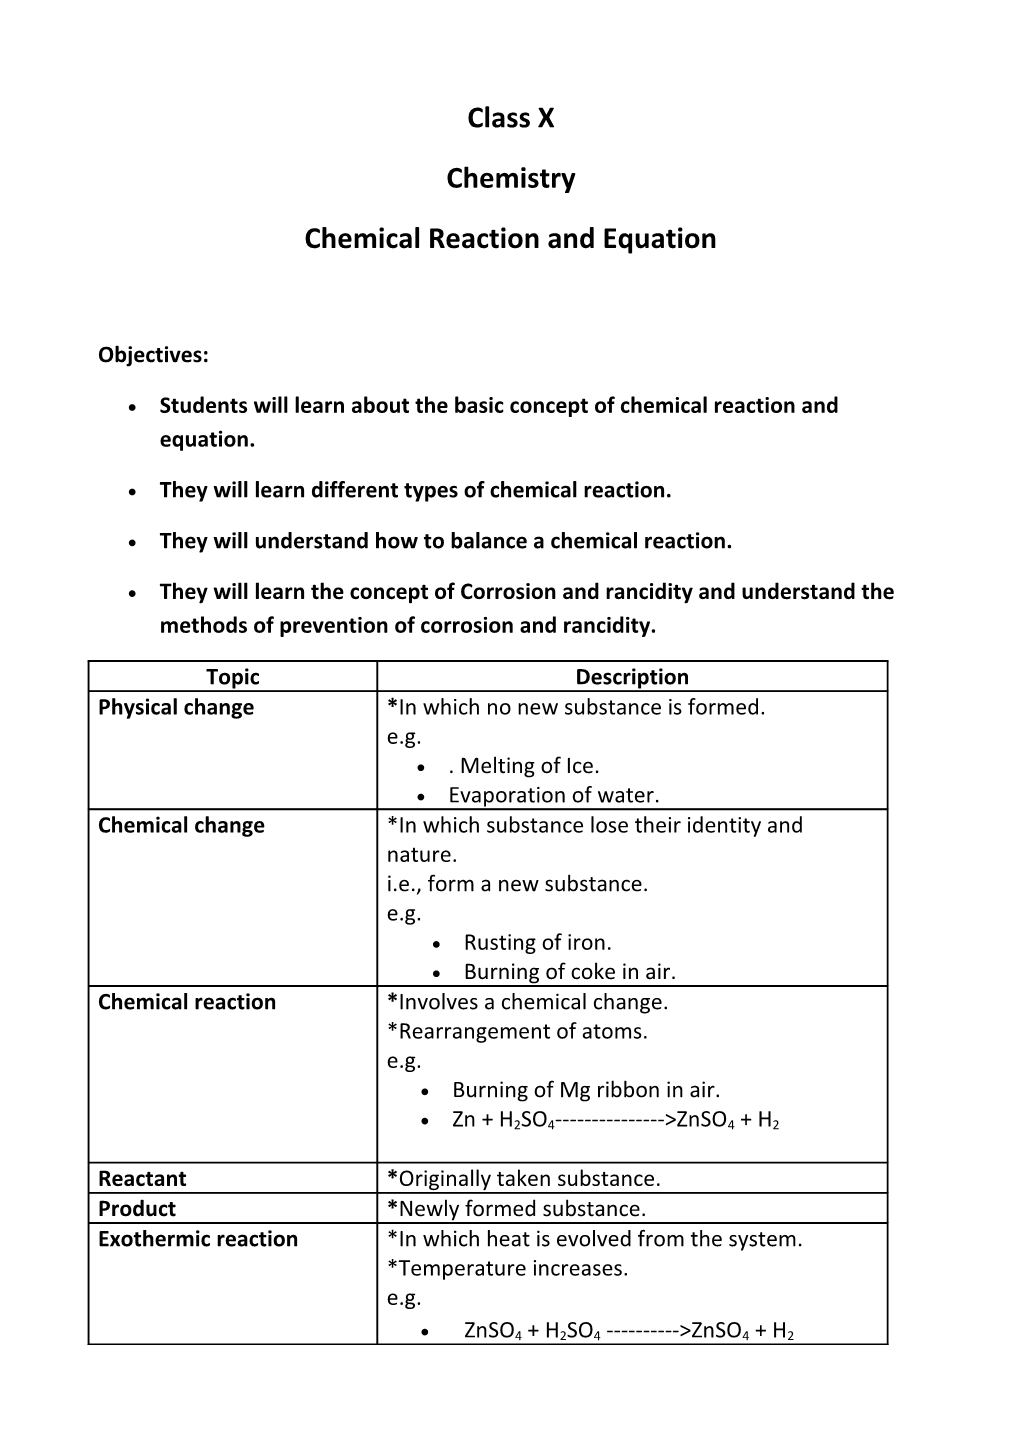 Chemical Reaction and Equation